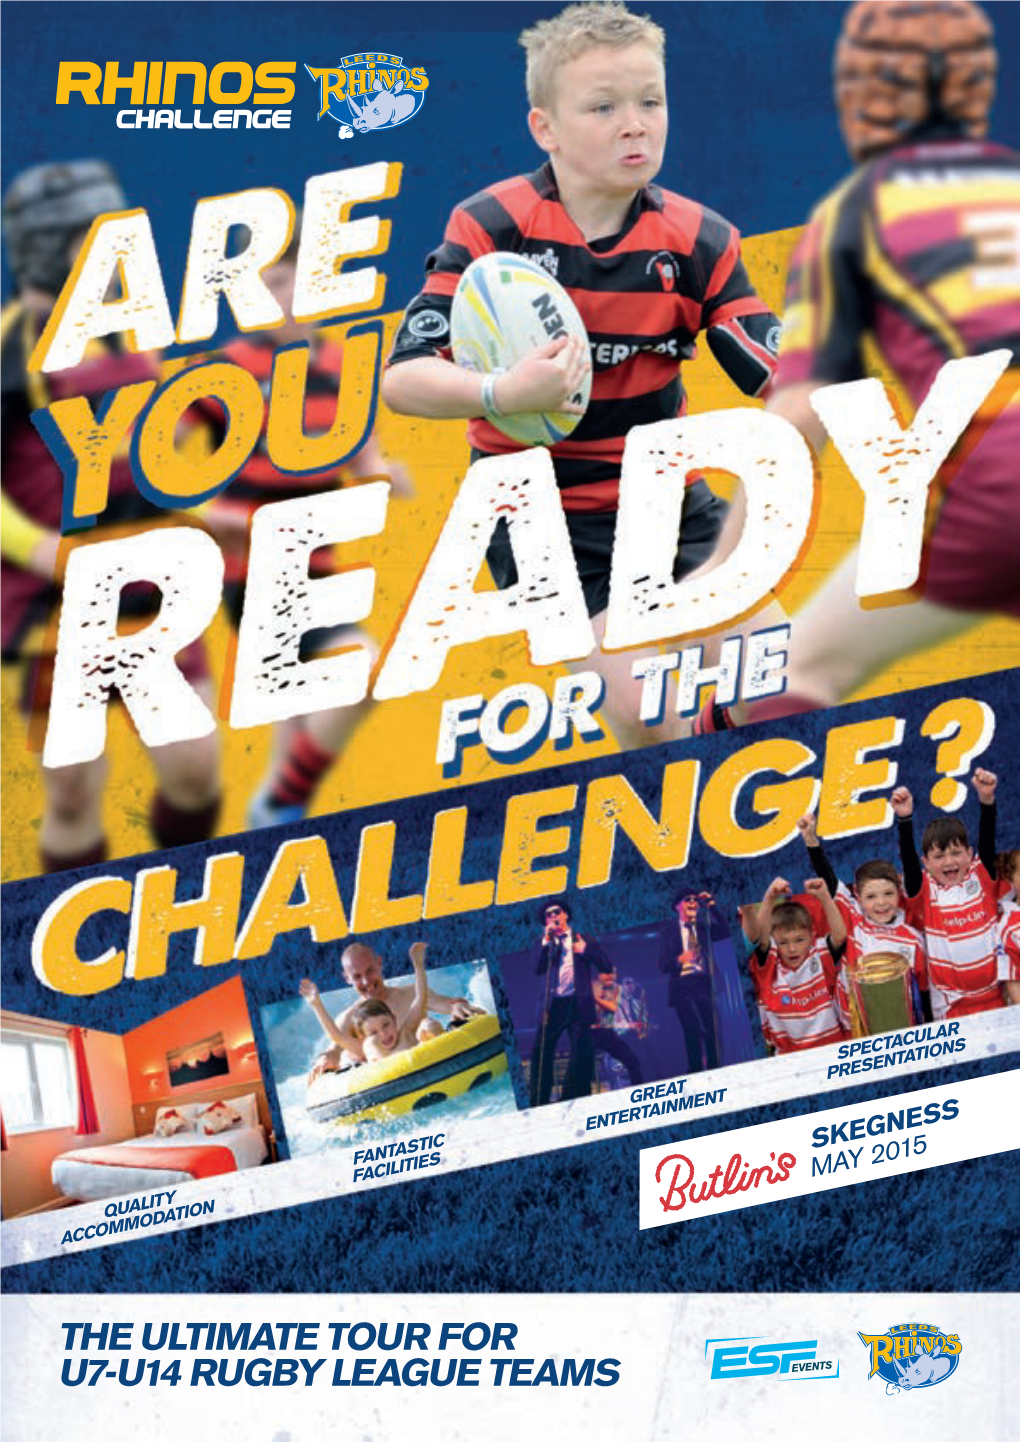 The Ultimate Tour for U7-U14 Rugby League Teams